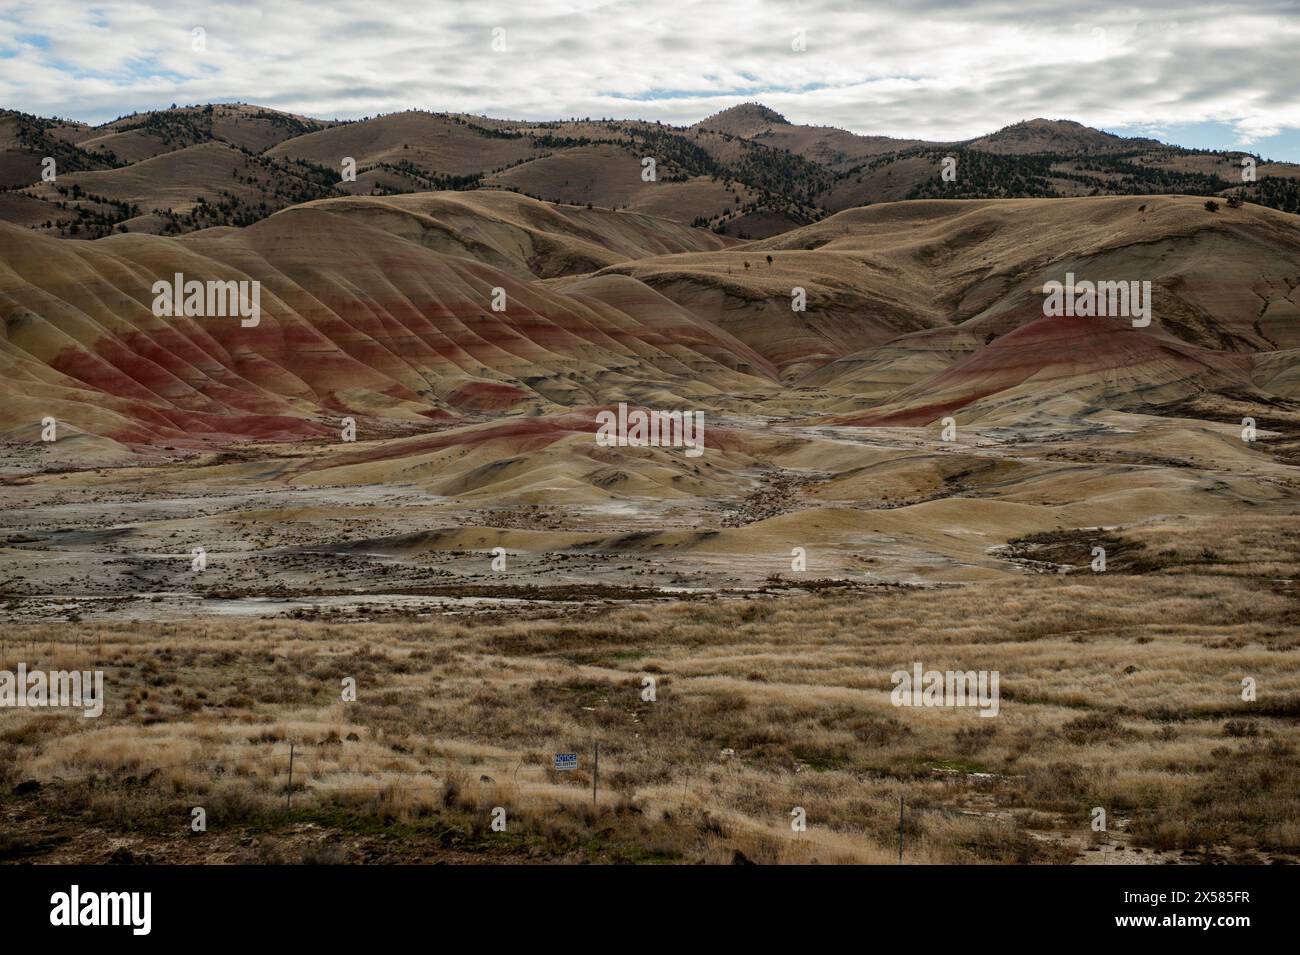 The Painted Hills of the John Day Fossil Beds National Monument, near Mitchell, Oregon Stock Photo